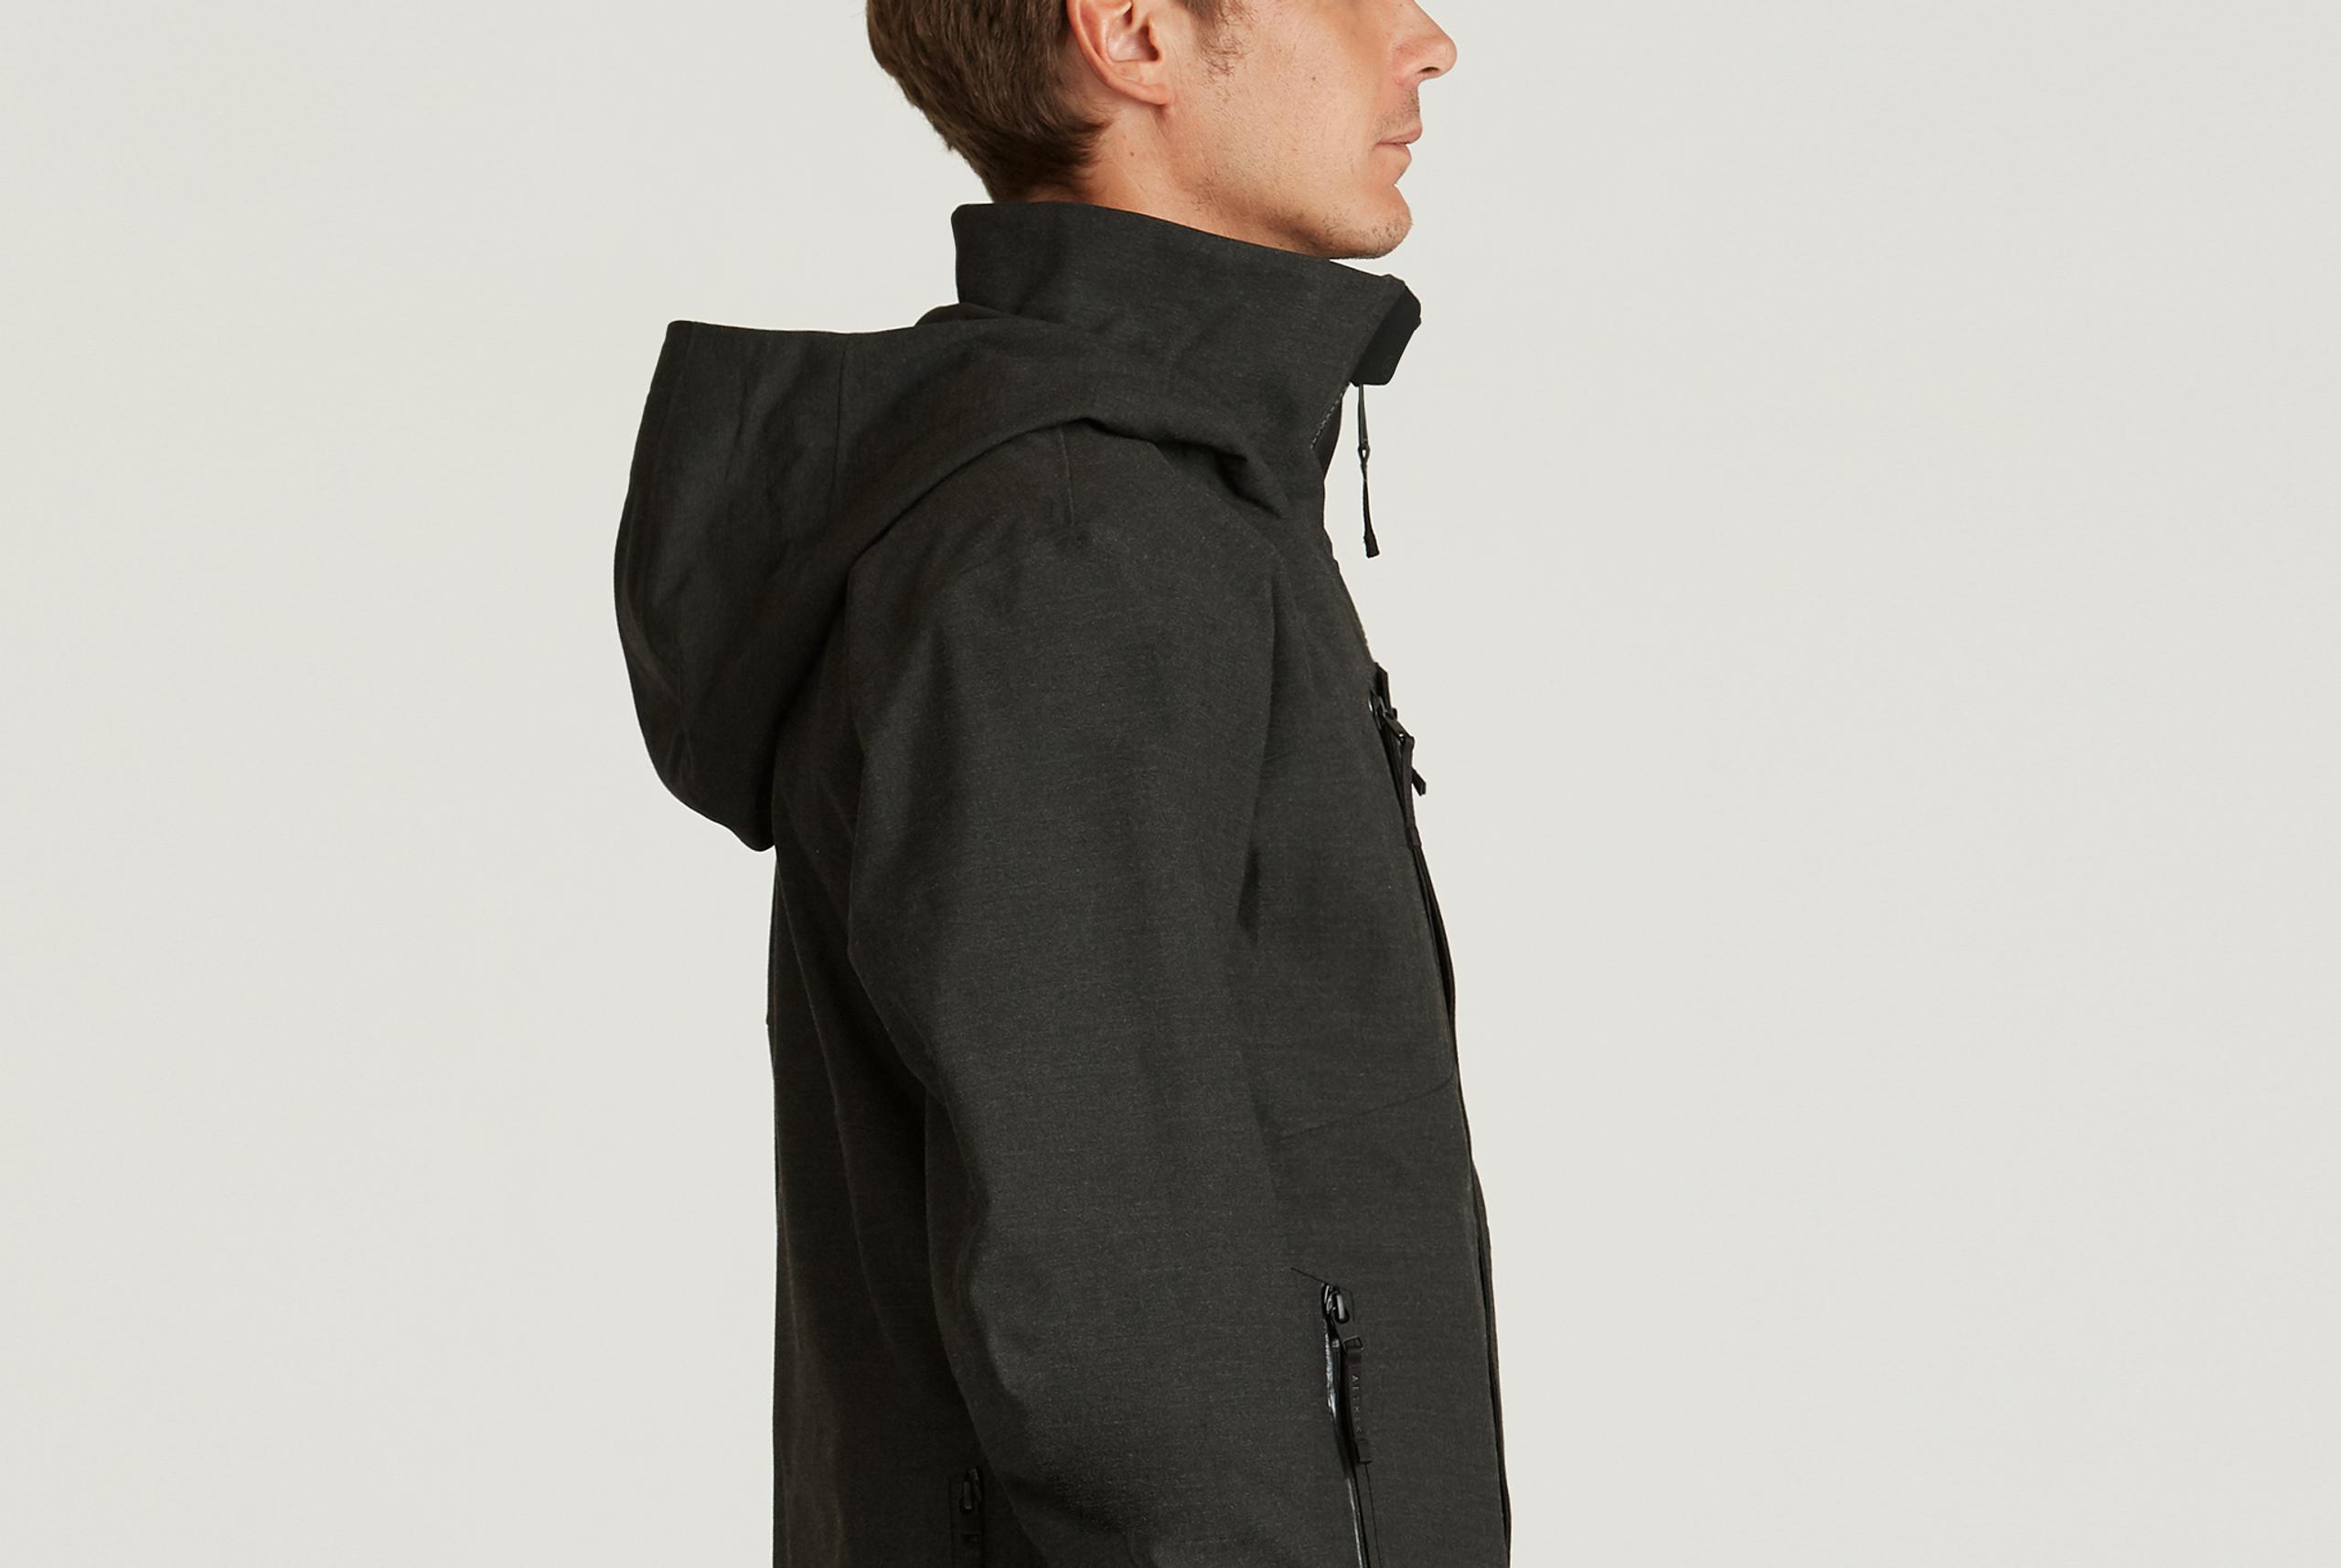 Profile view of man wearing Catalyst Snow Shell